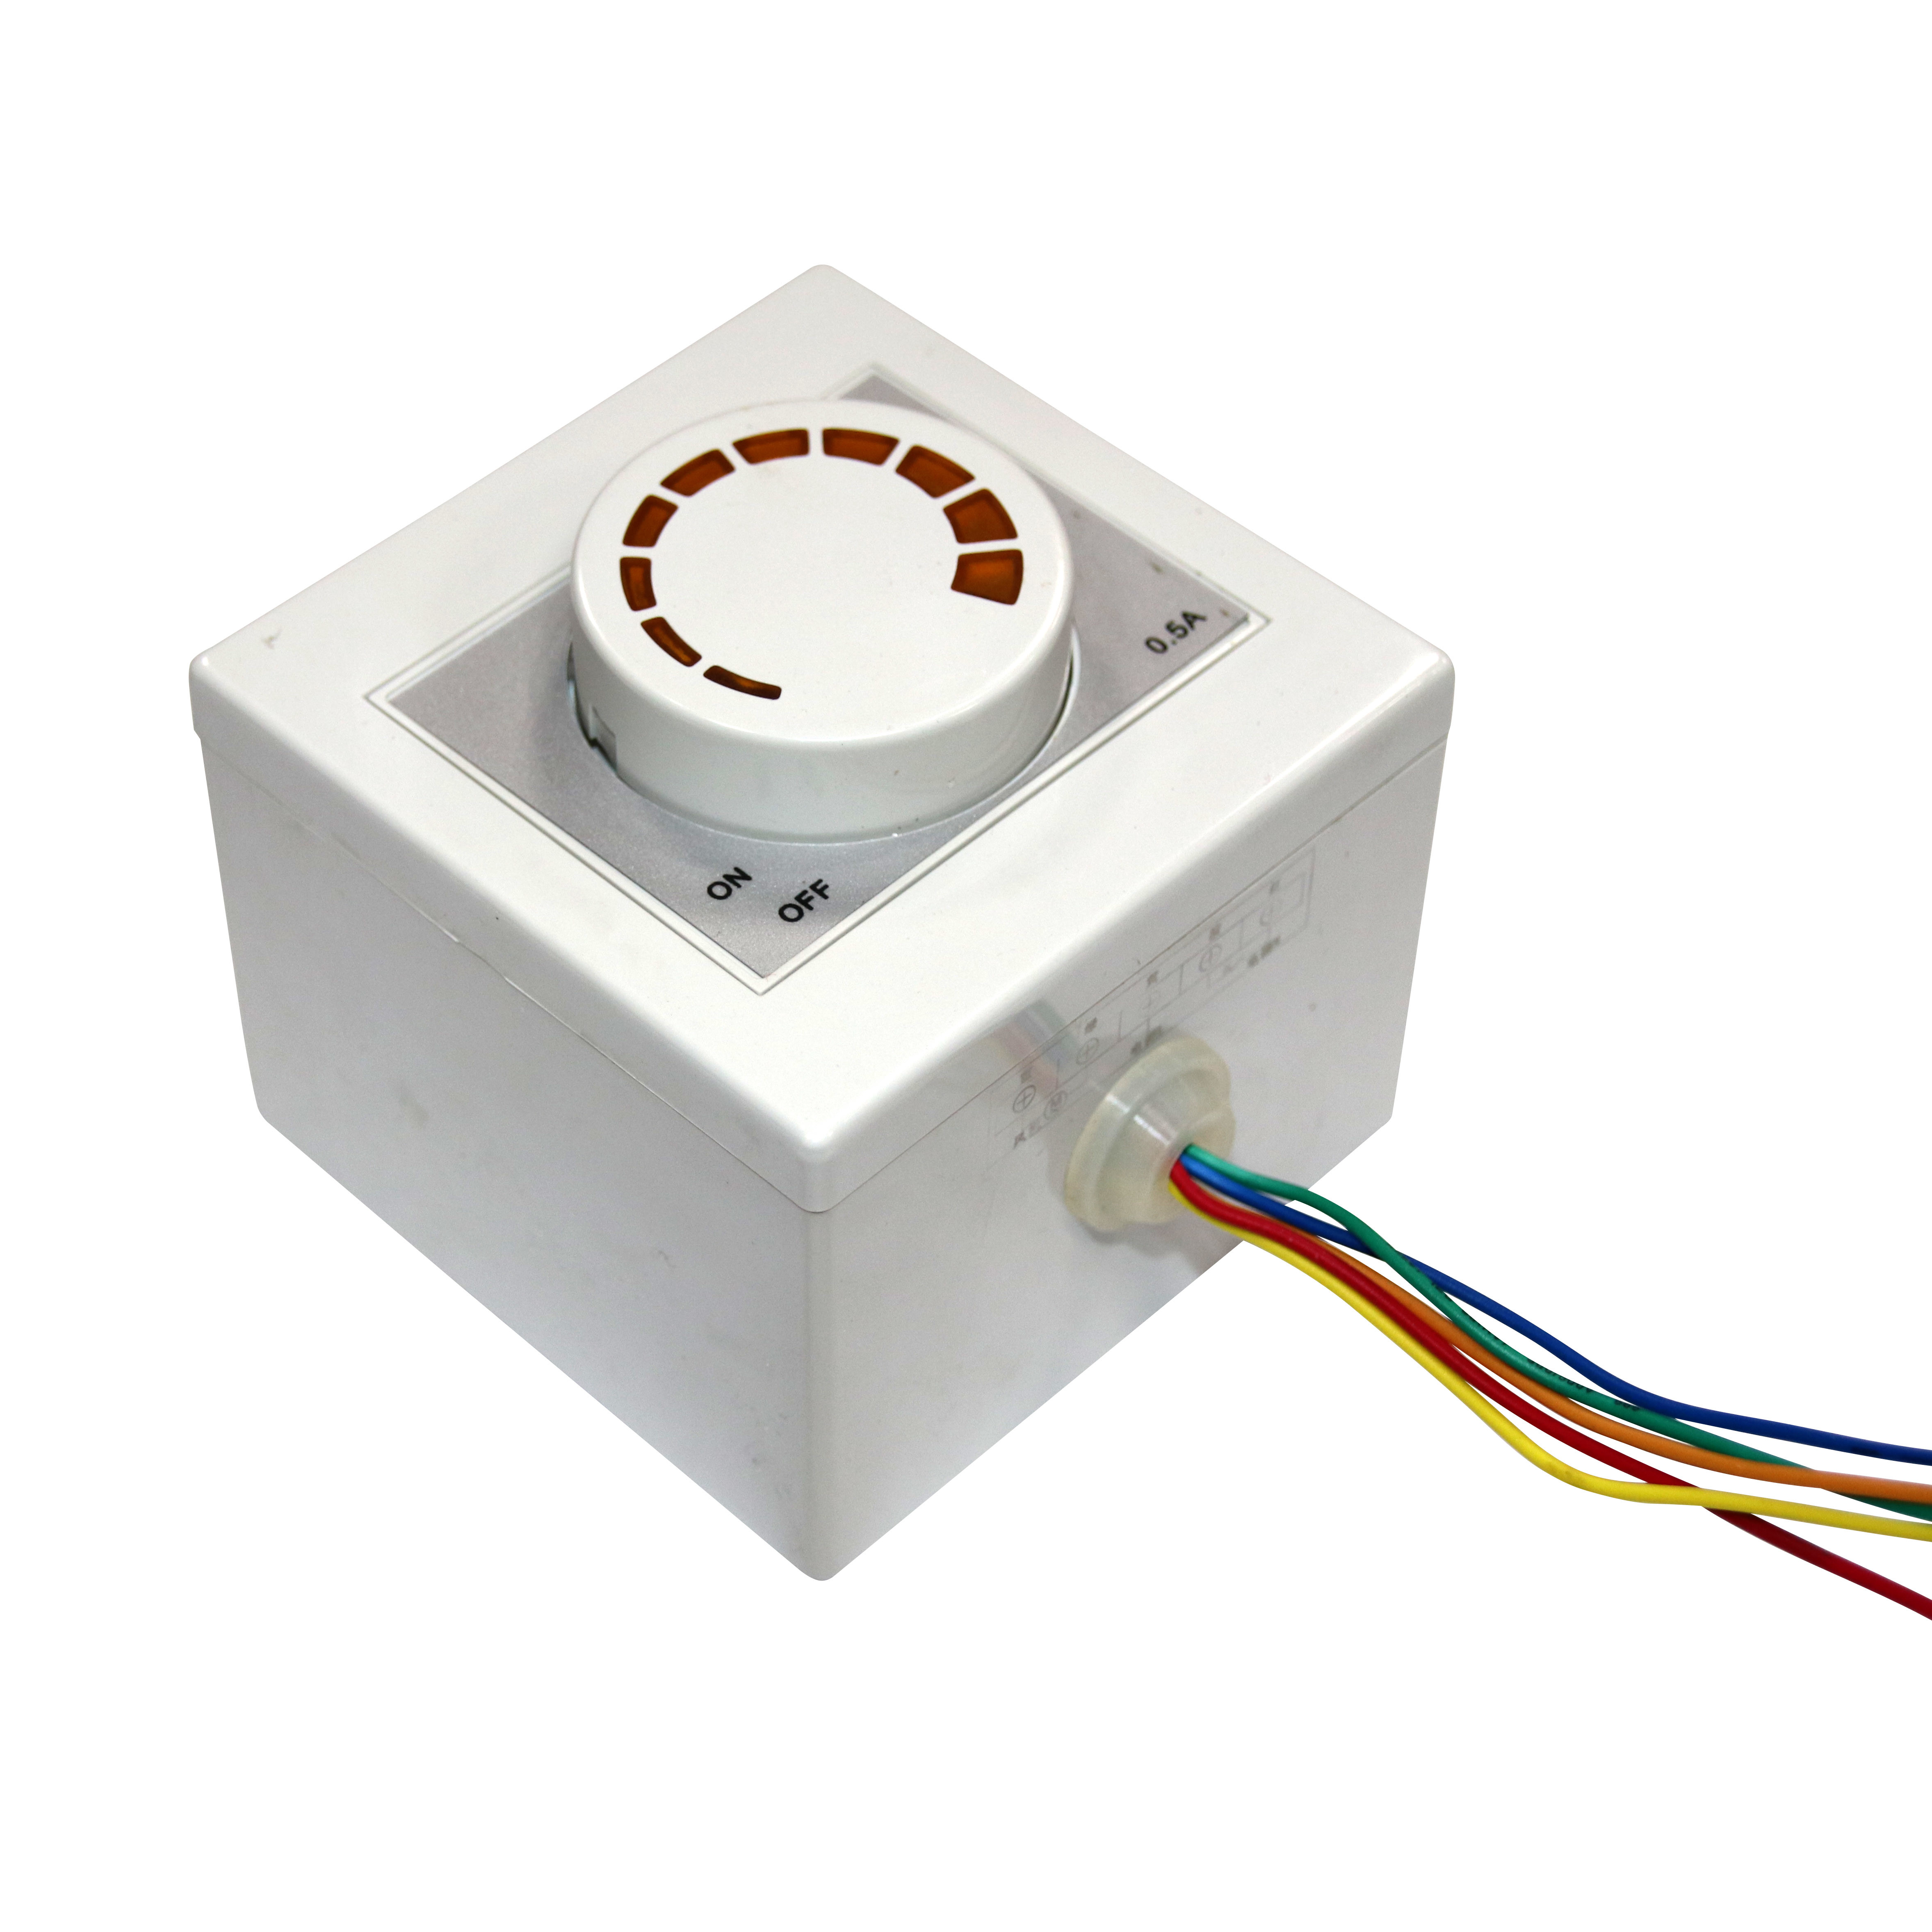 China Gold Ssr Stepless Variable Fan Speed Controller wholesale